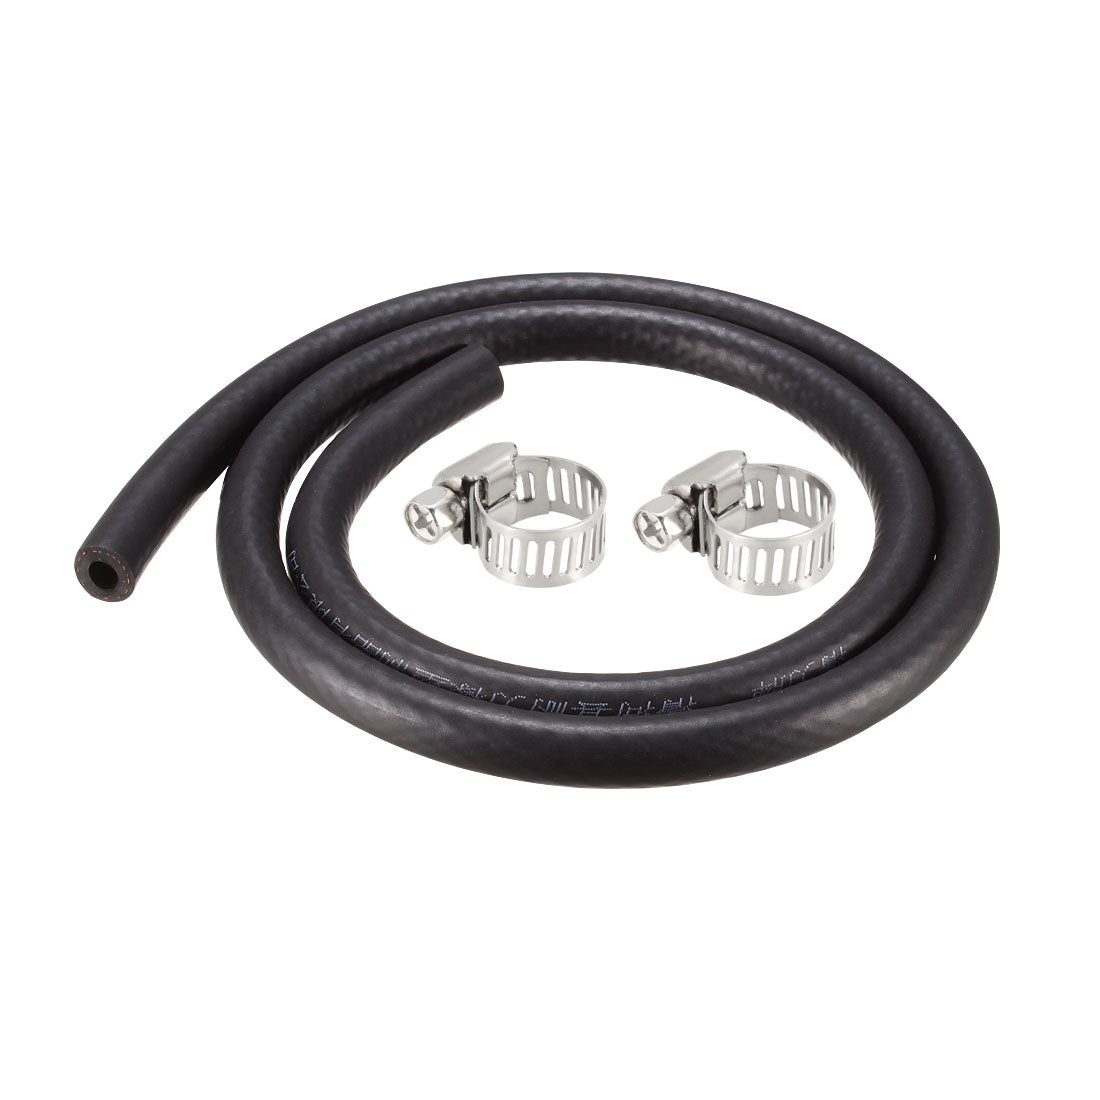 uxcell Uxcell Fuel Line Fuel Hose Rubber  6mm I.D.  0.9M/2.95FT  Diesel Petrol Hose Engine Pipe Tubing with 2 Clamps